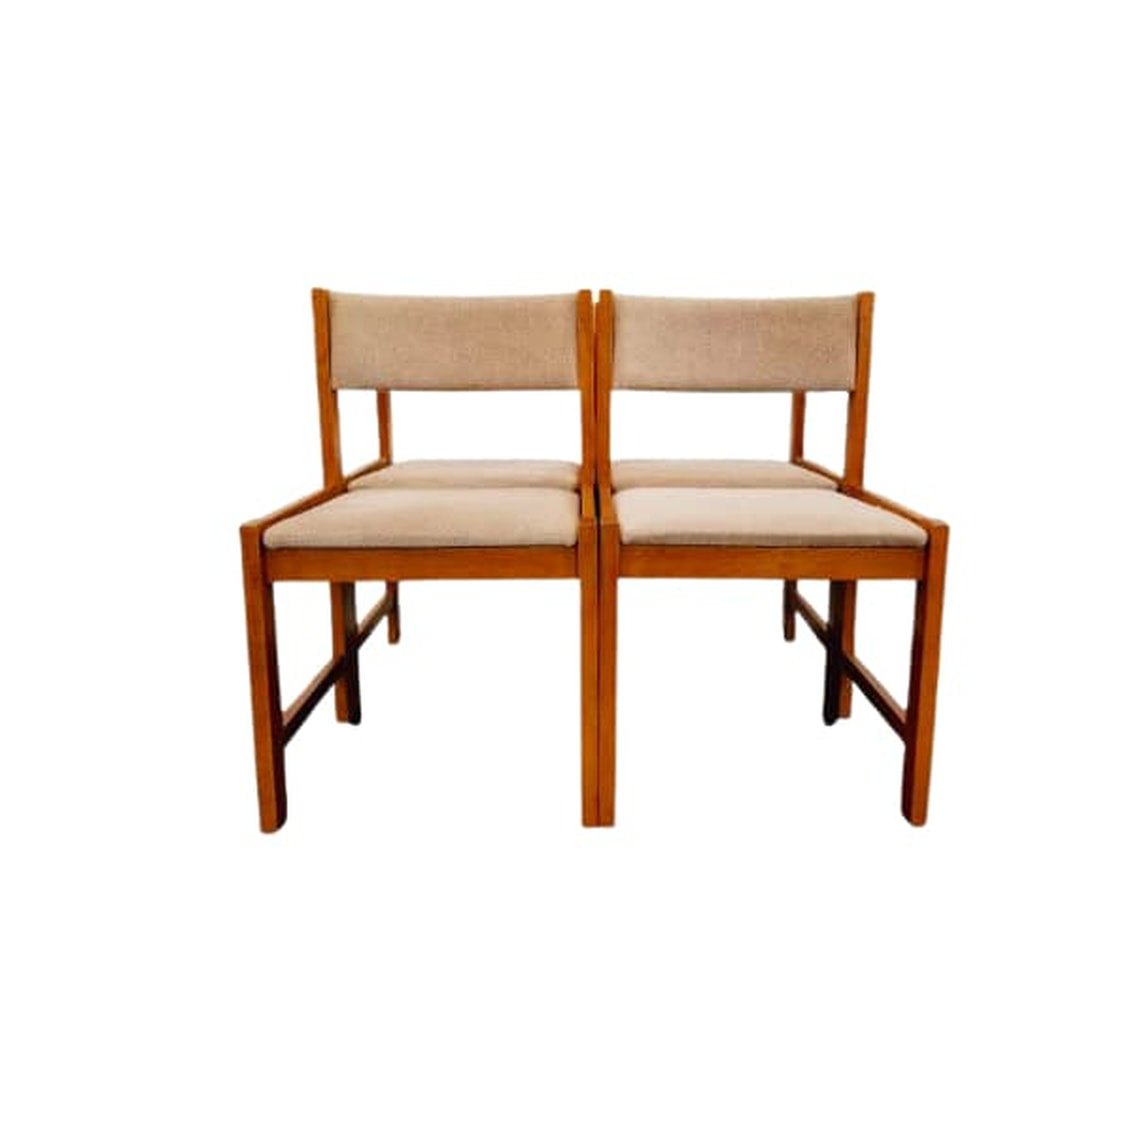 Set of four vintage Danish Modern birch wood armless dining chairs with original cream velour upholstery on backs and seats.